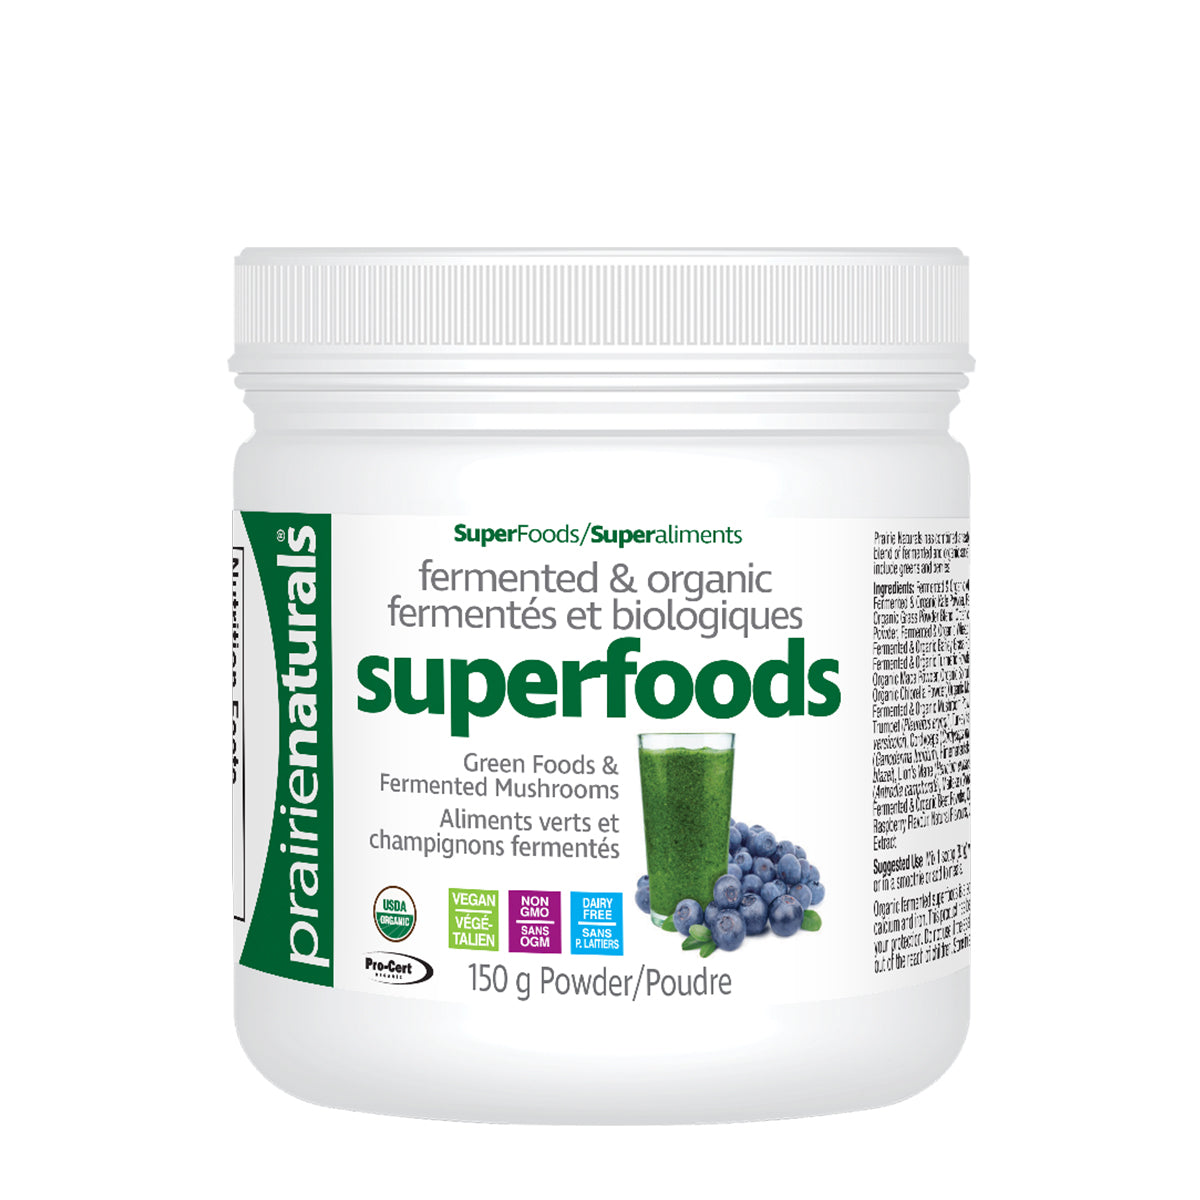 Prairie Naturals Fermented & Organic Superfood Blend - 150g powder: A powerful and nourishing blend of fermented and organic superfoods.